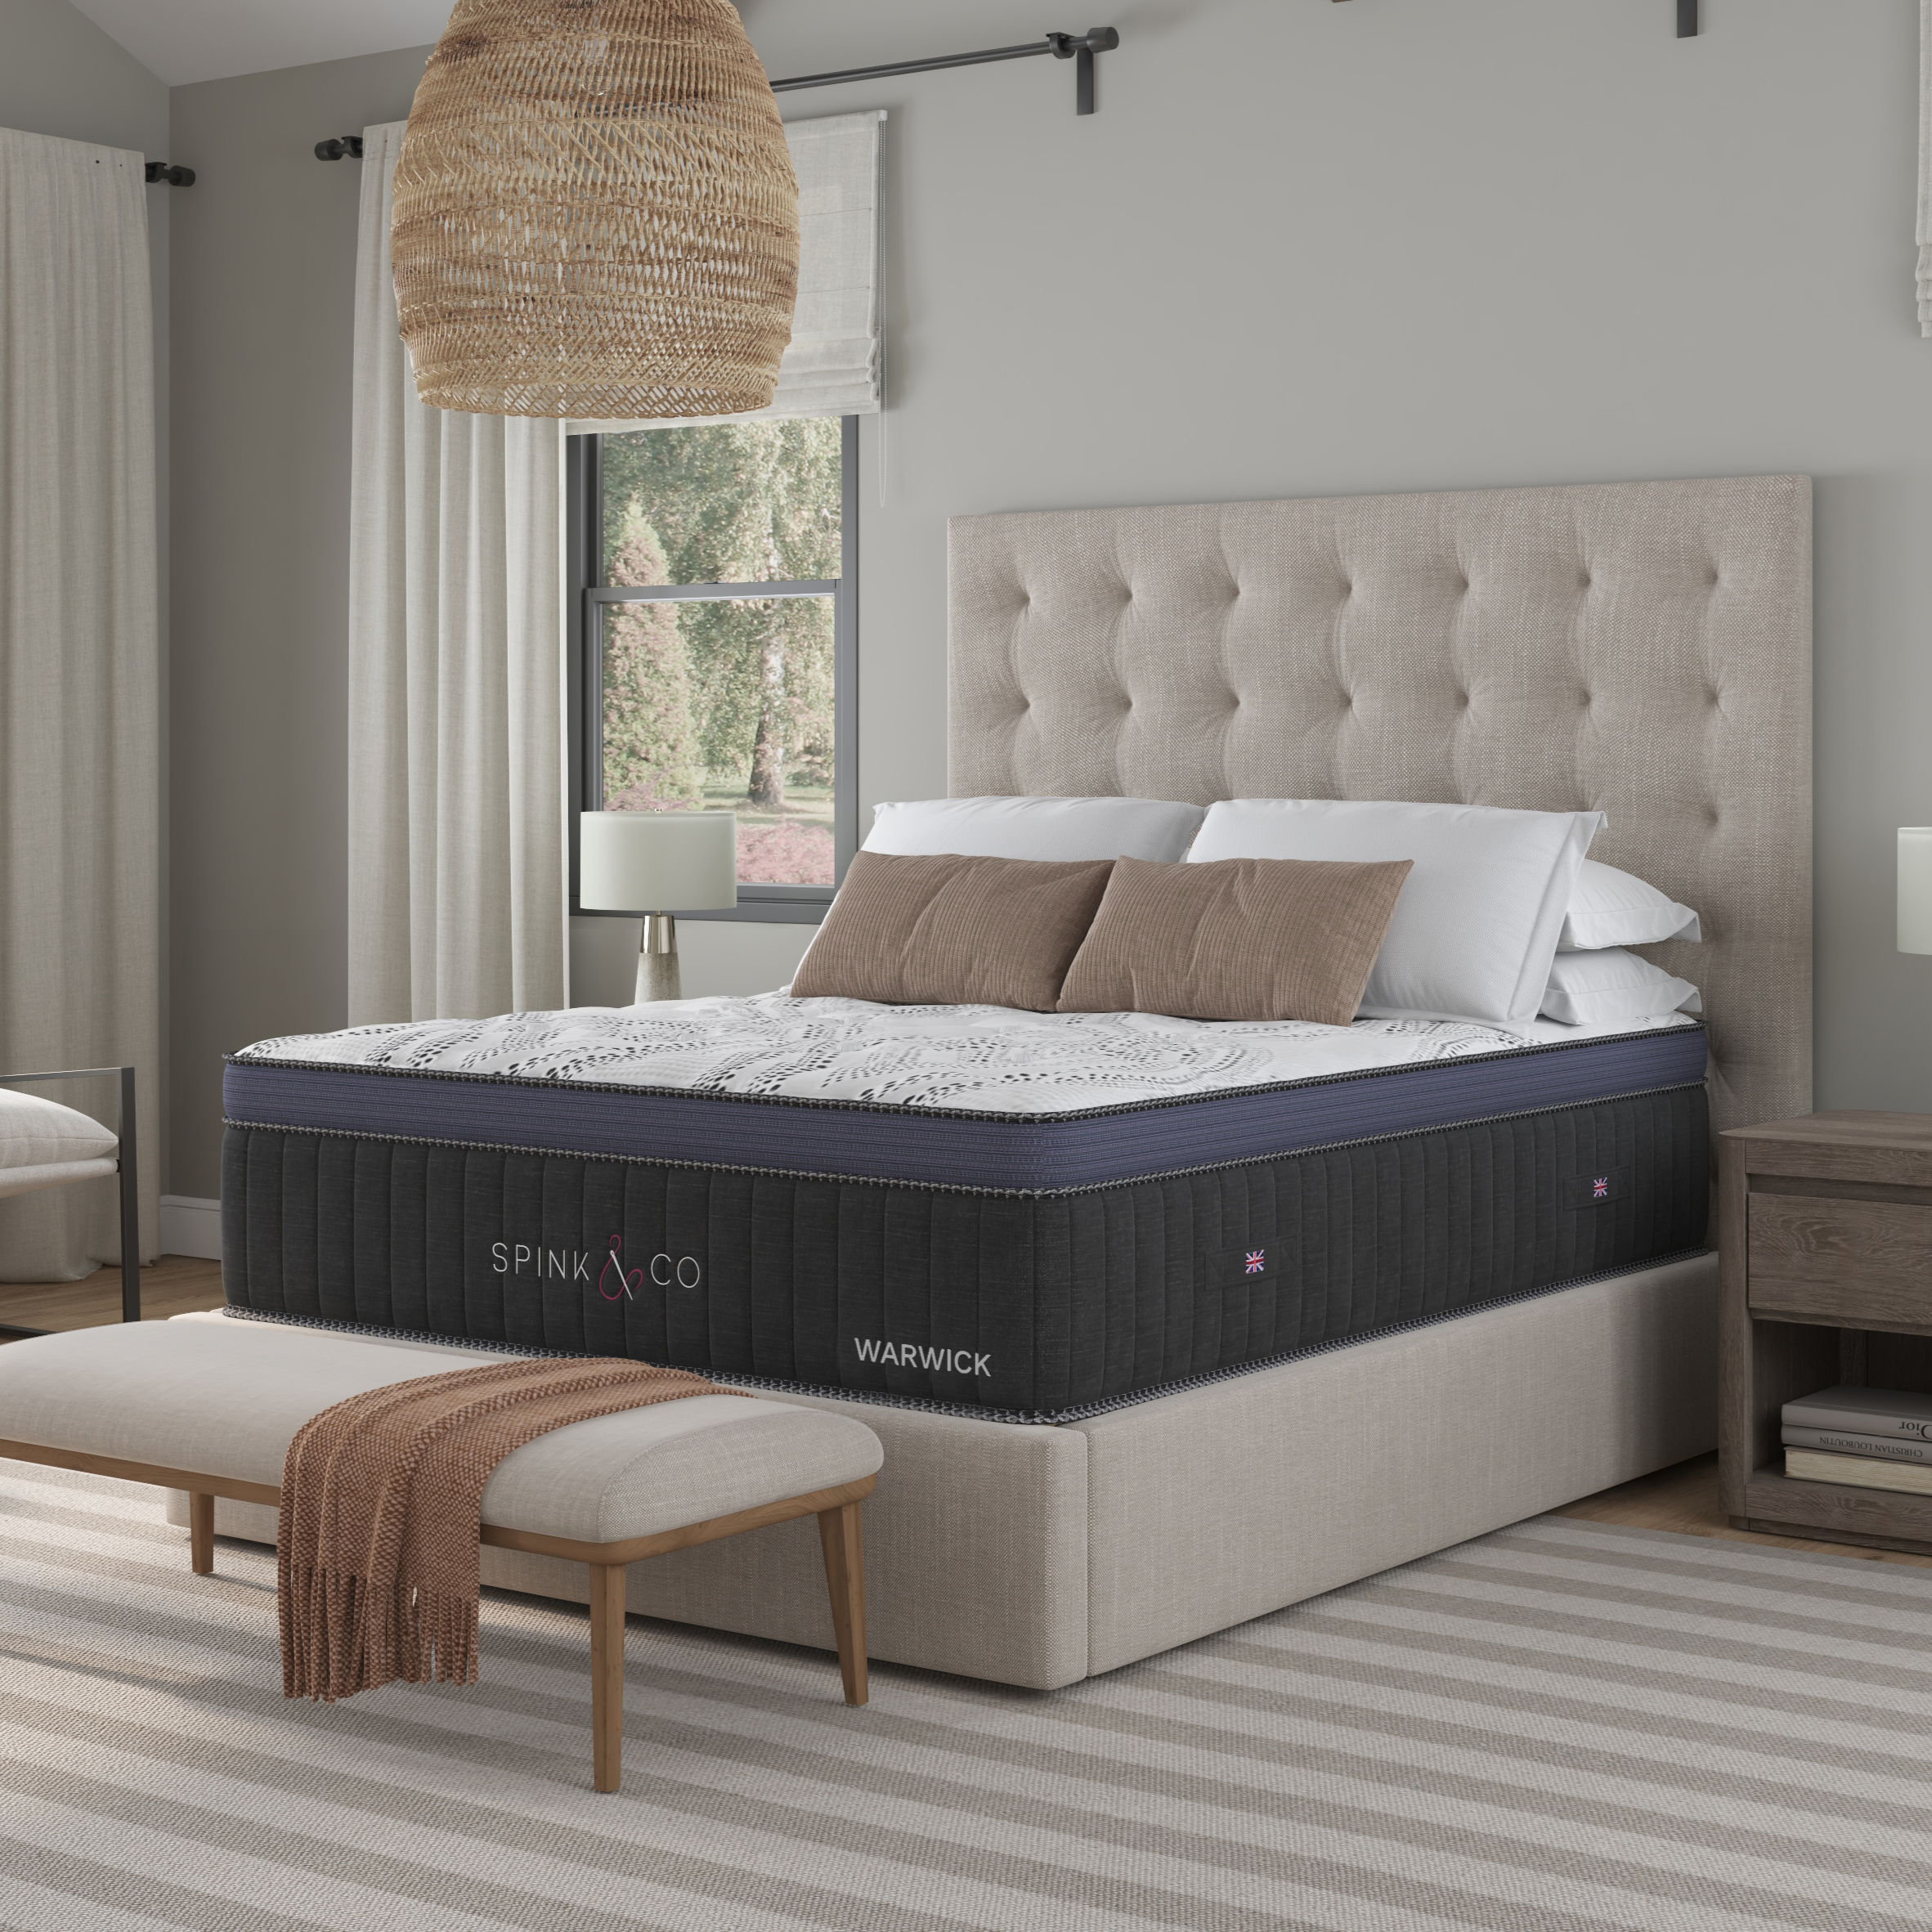 Picture of Spink & Co Warwick Euro Top Mattress